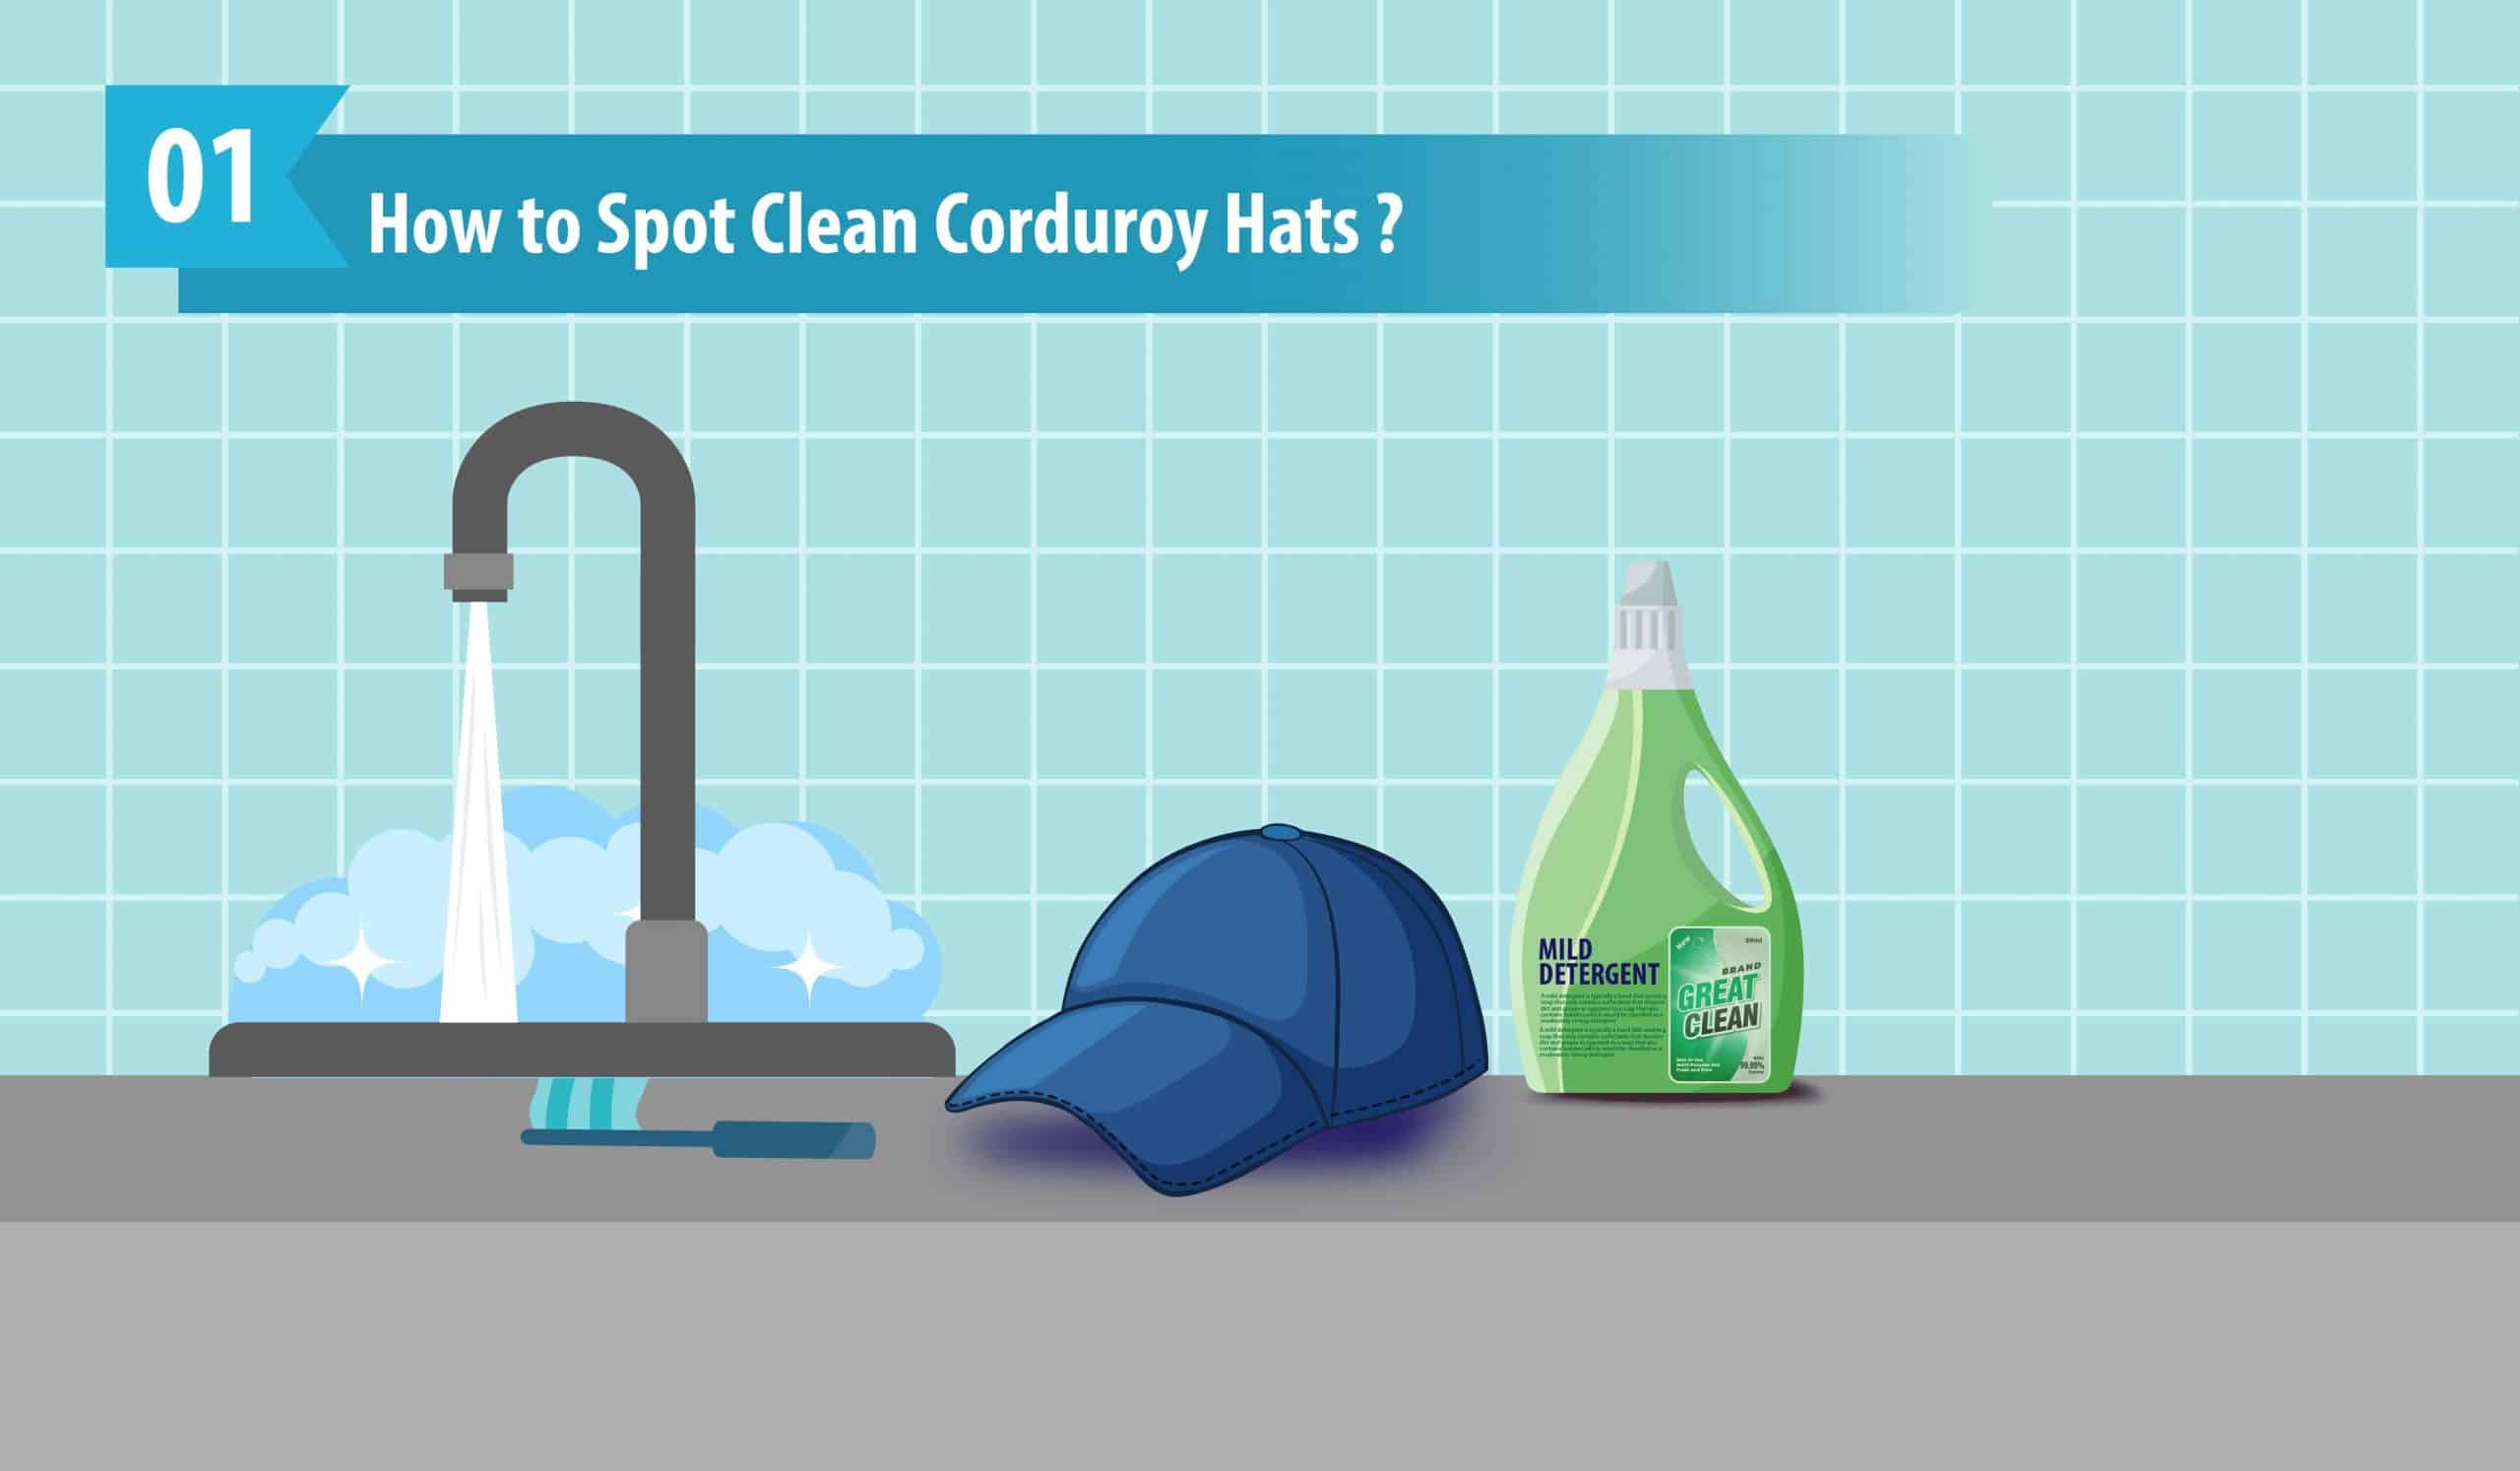 How to Spot Clean Corduroy Hats